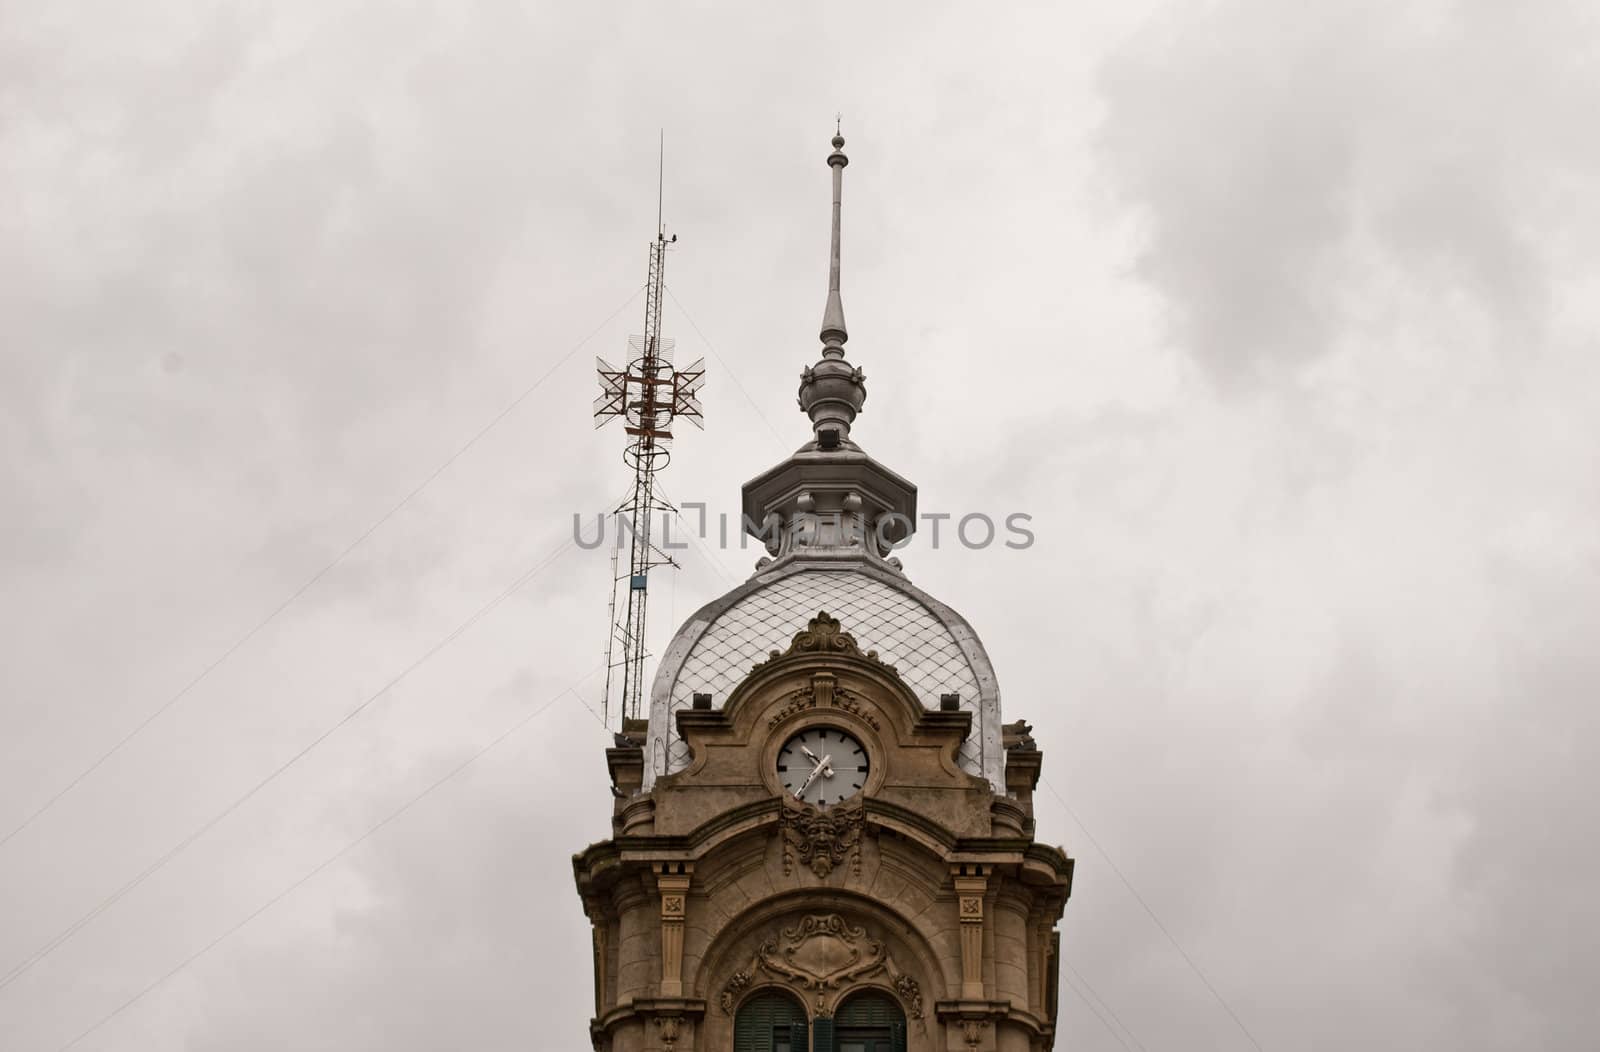 old tower with clock